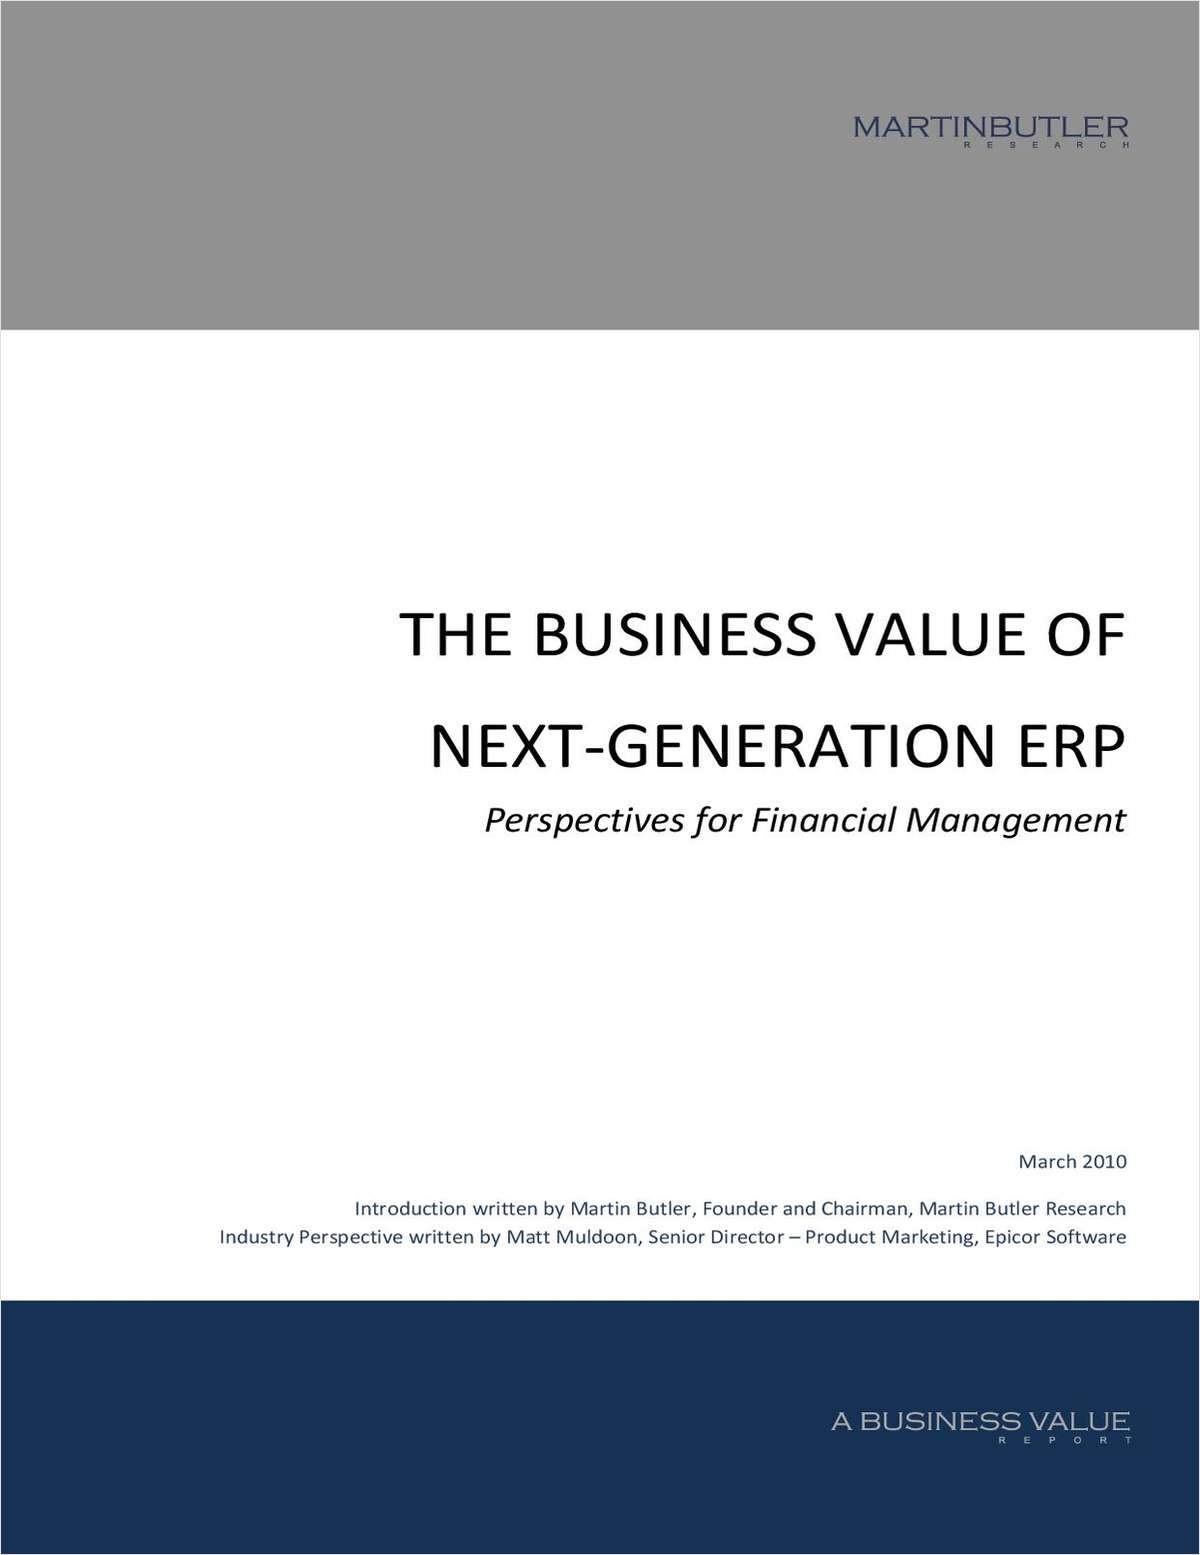 THE BUSINESS VALUE OF NEXT-GENERATION ERP: Perspectives for Financial Management